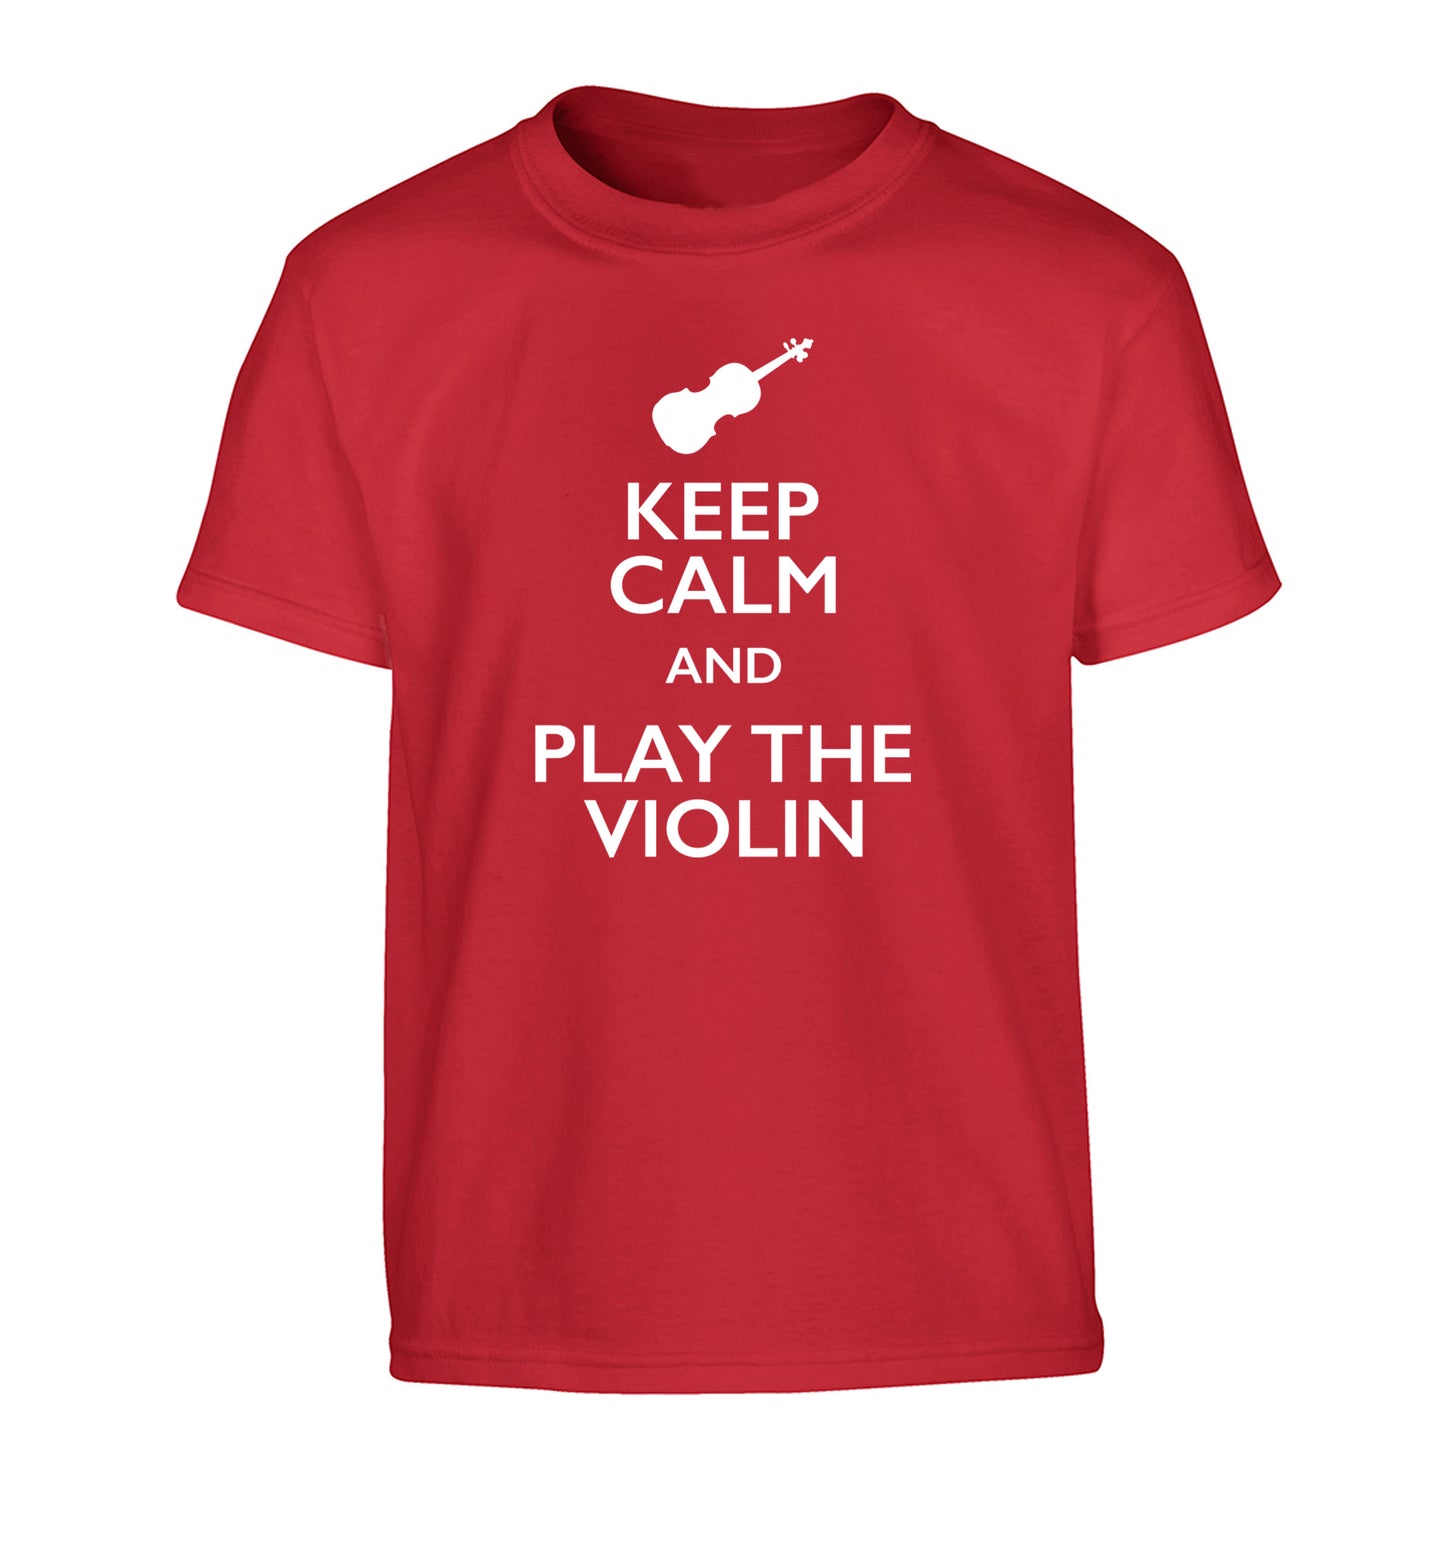 Keep calm and play the violin Children's red Tshirt 12-13 Years